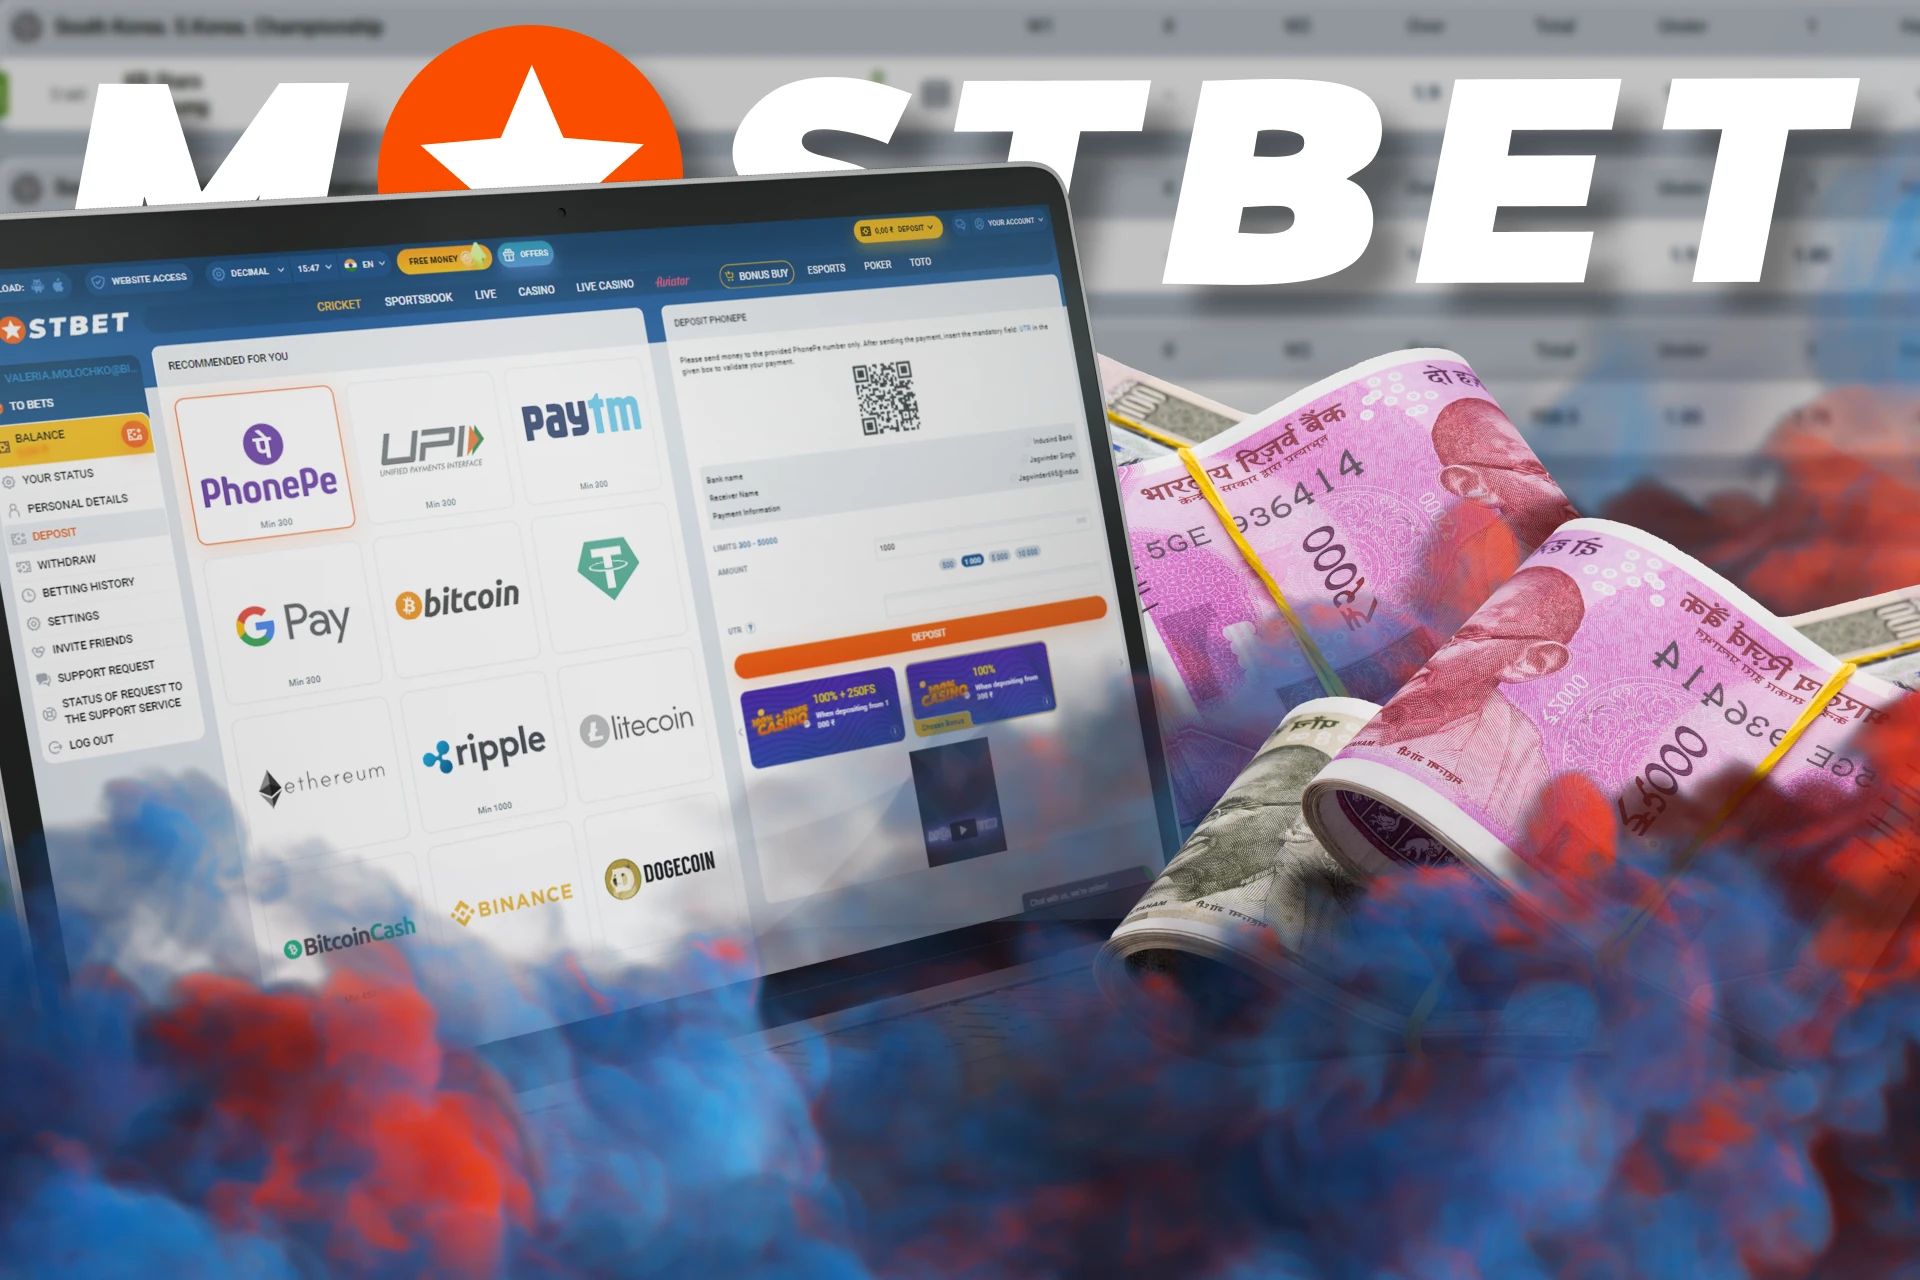 Mostbet provides its players with all the popular payment systems in India.